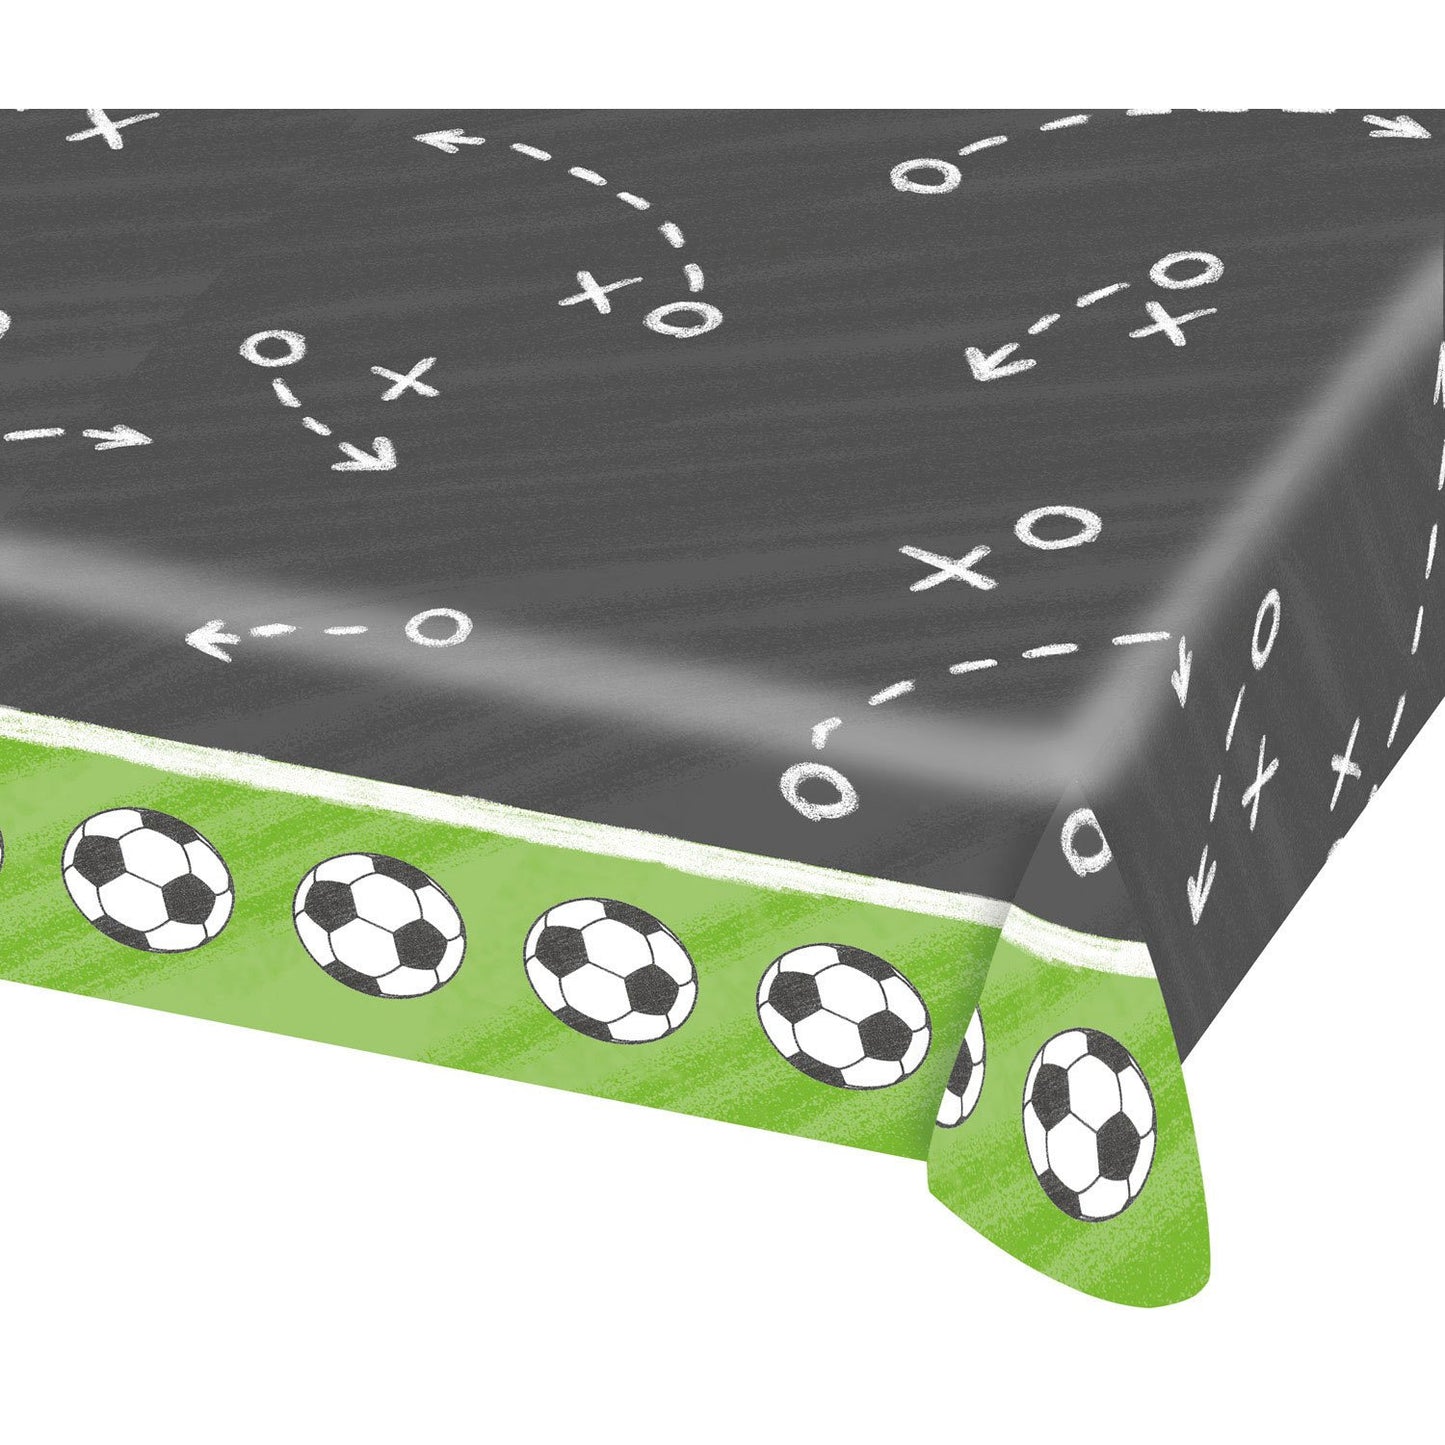 Kicker Party Paper Tablecover - 1.8m x 1.2m